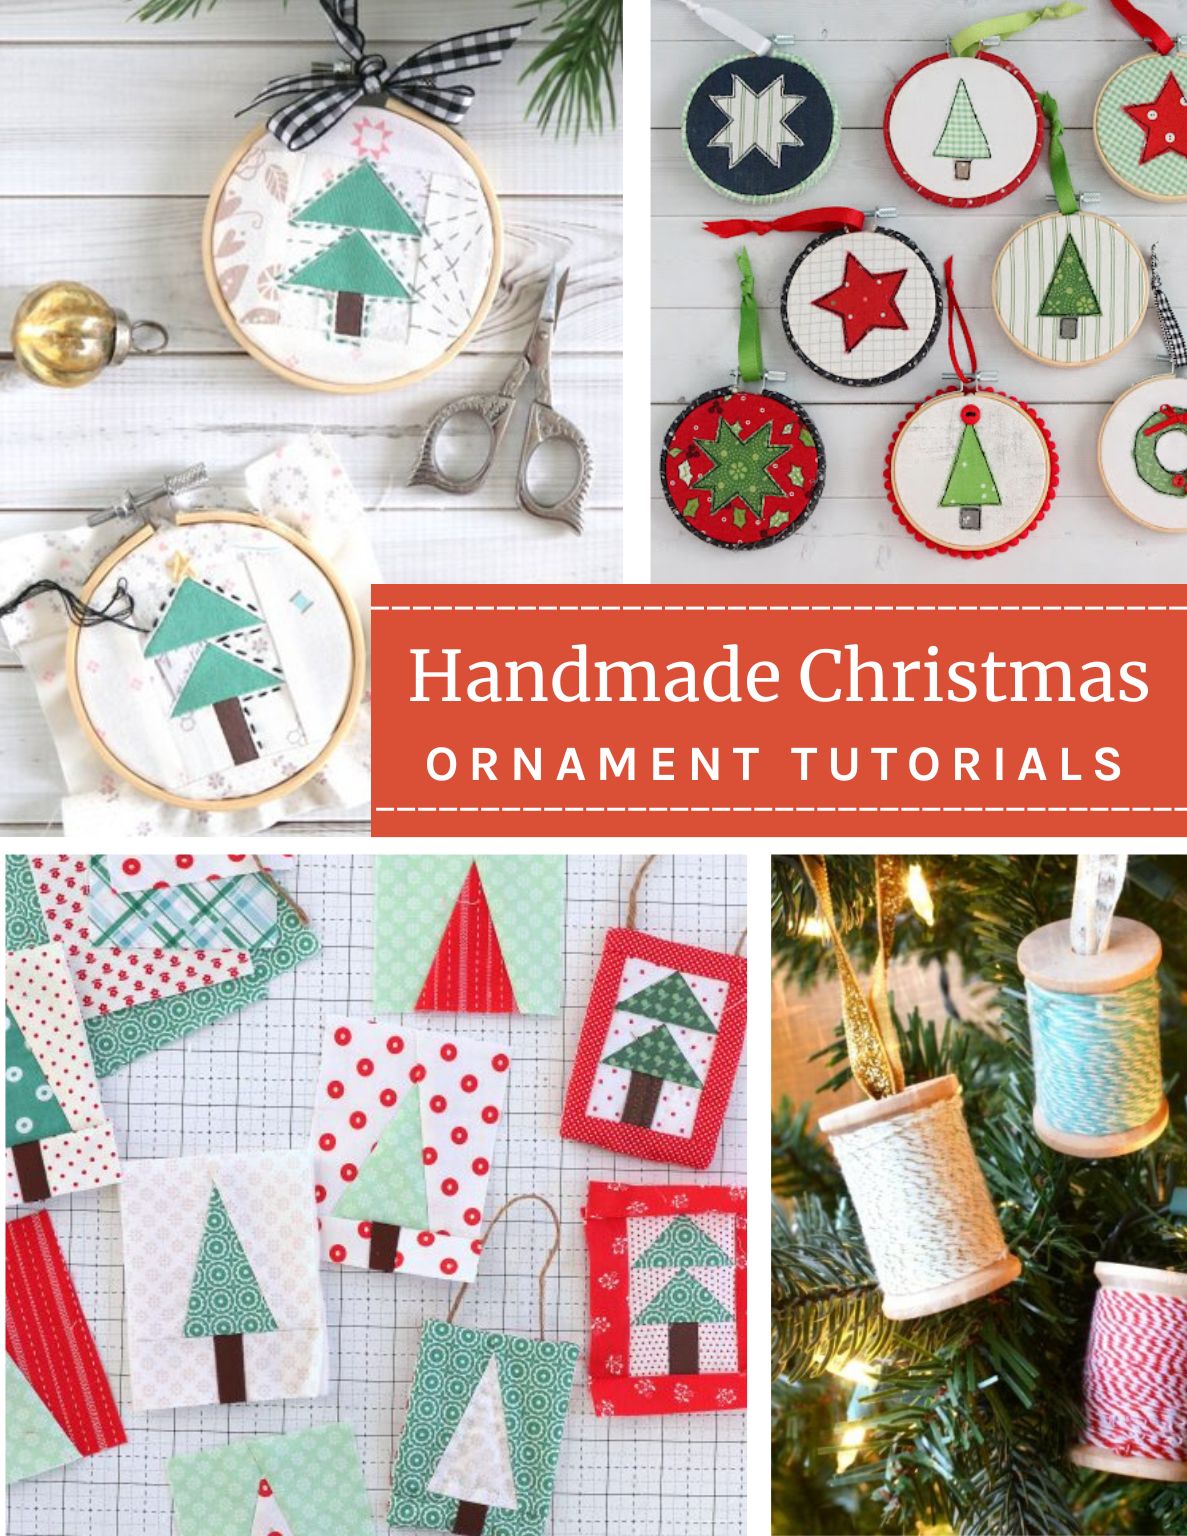 Easy Fabric Christmas Tree Ornaments to Sew - Easy Sewing For Beginners